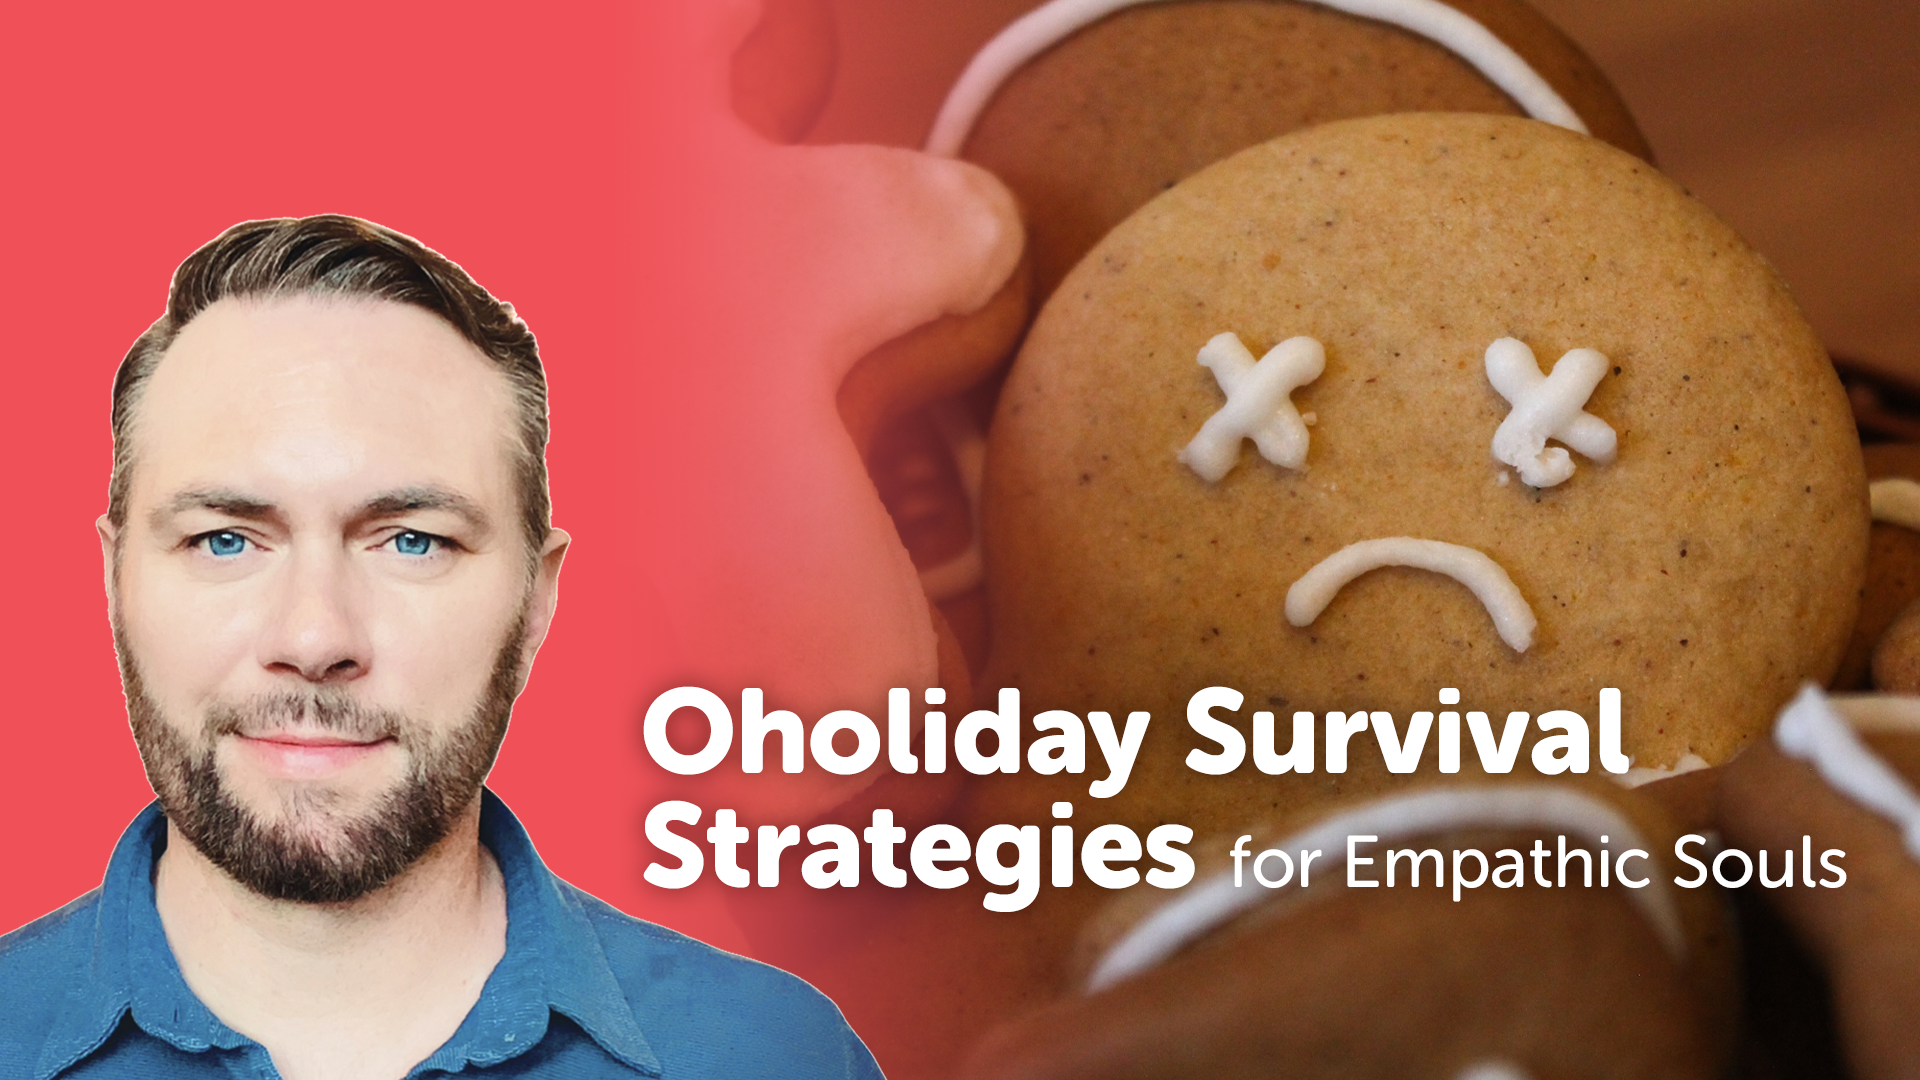 NEW VIDEO – Oholiday Survival Strategies for Empathic Souls